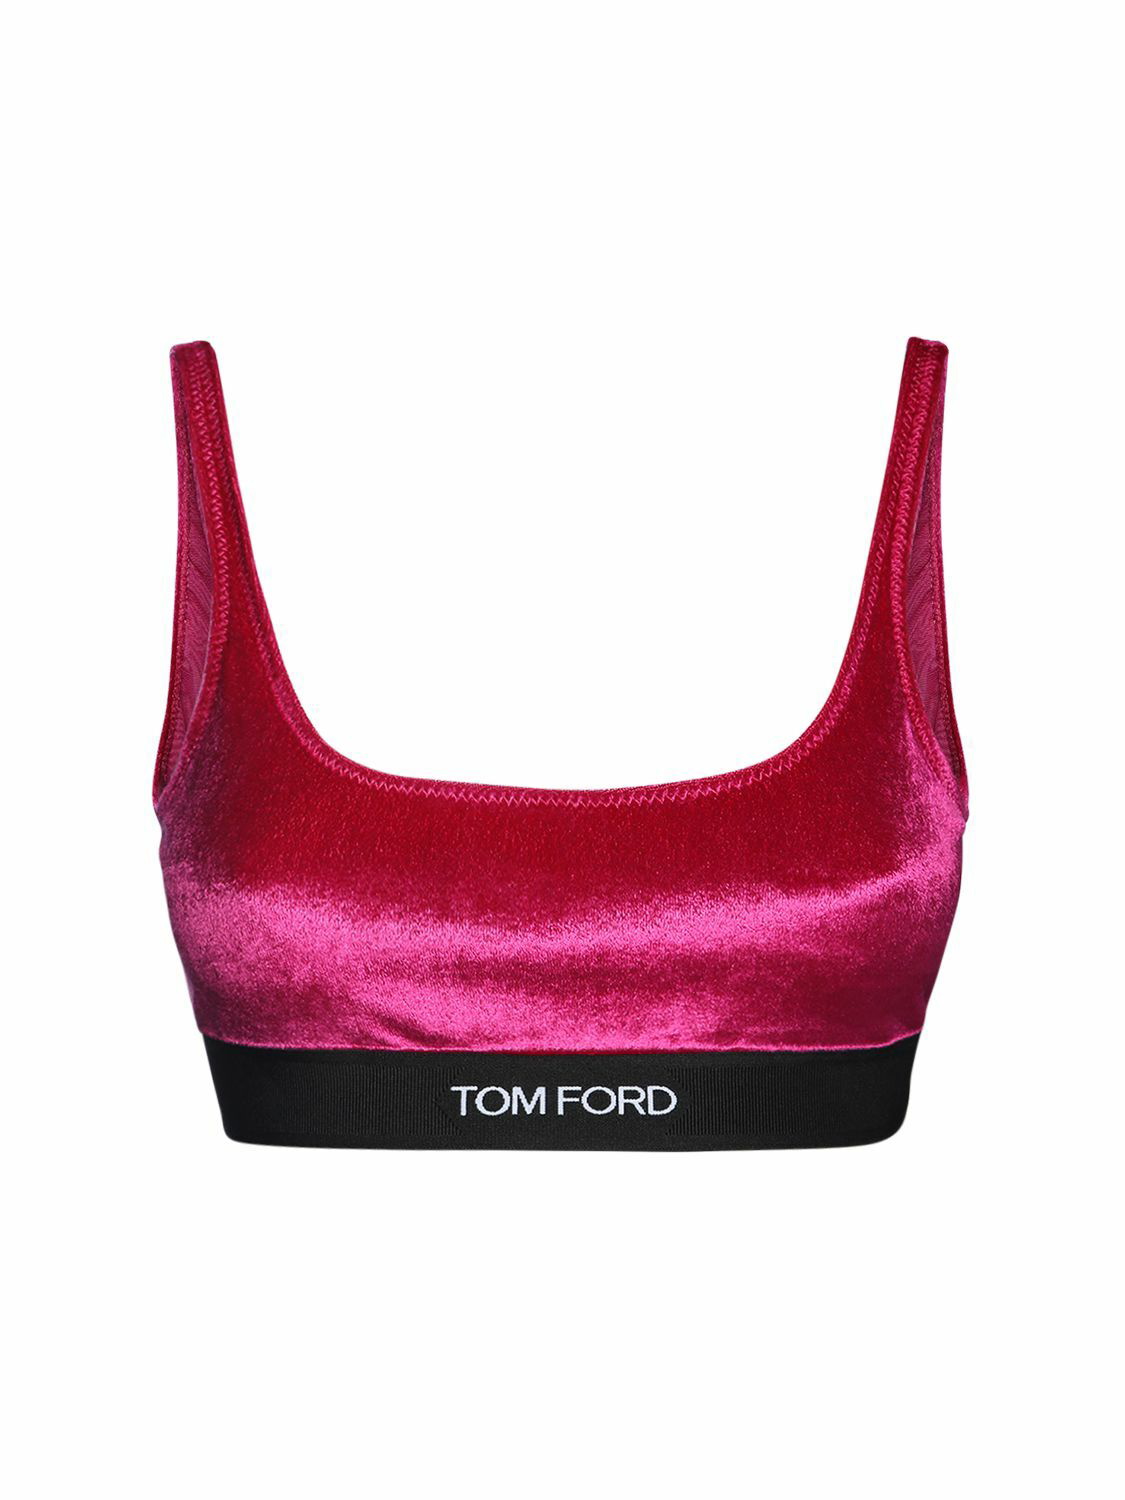 Red Scoop Neck Bra by TOM FORD on Sale